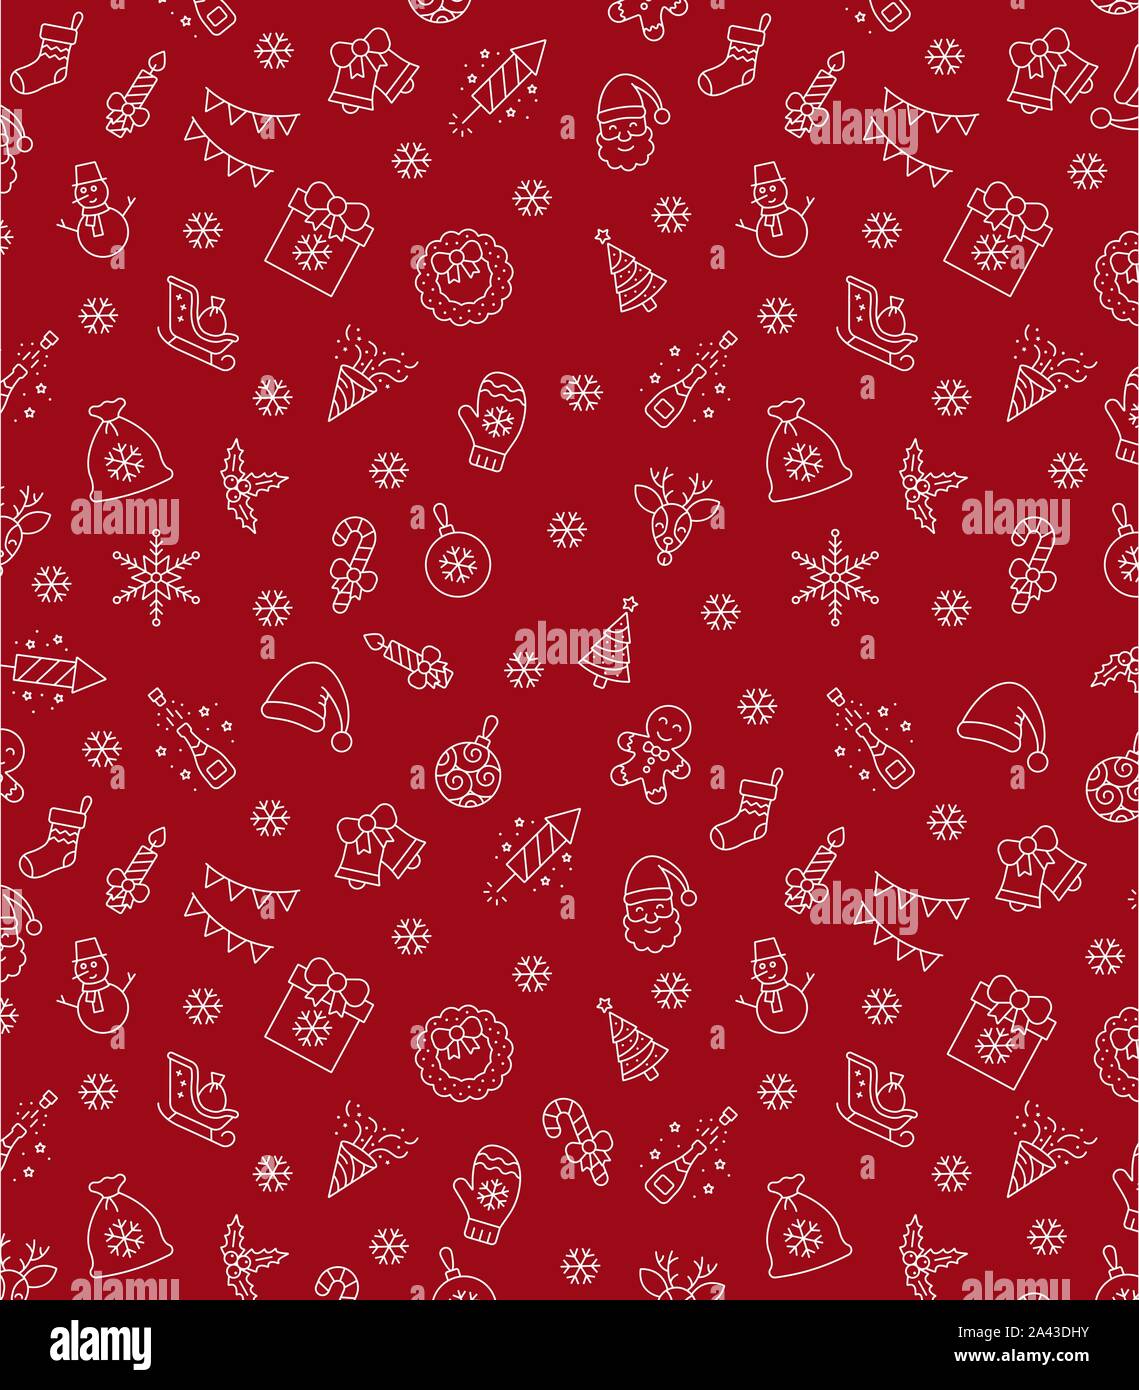 Christmas icons seamless pattern, xmas background, happy new year red ...